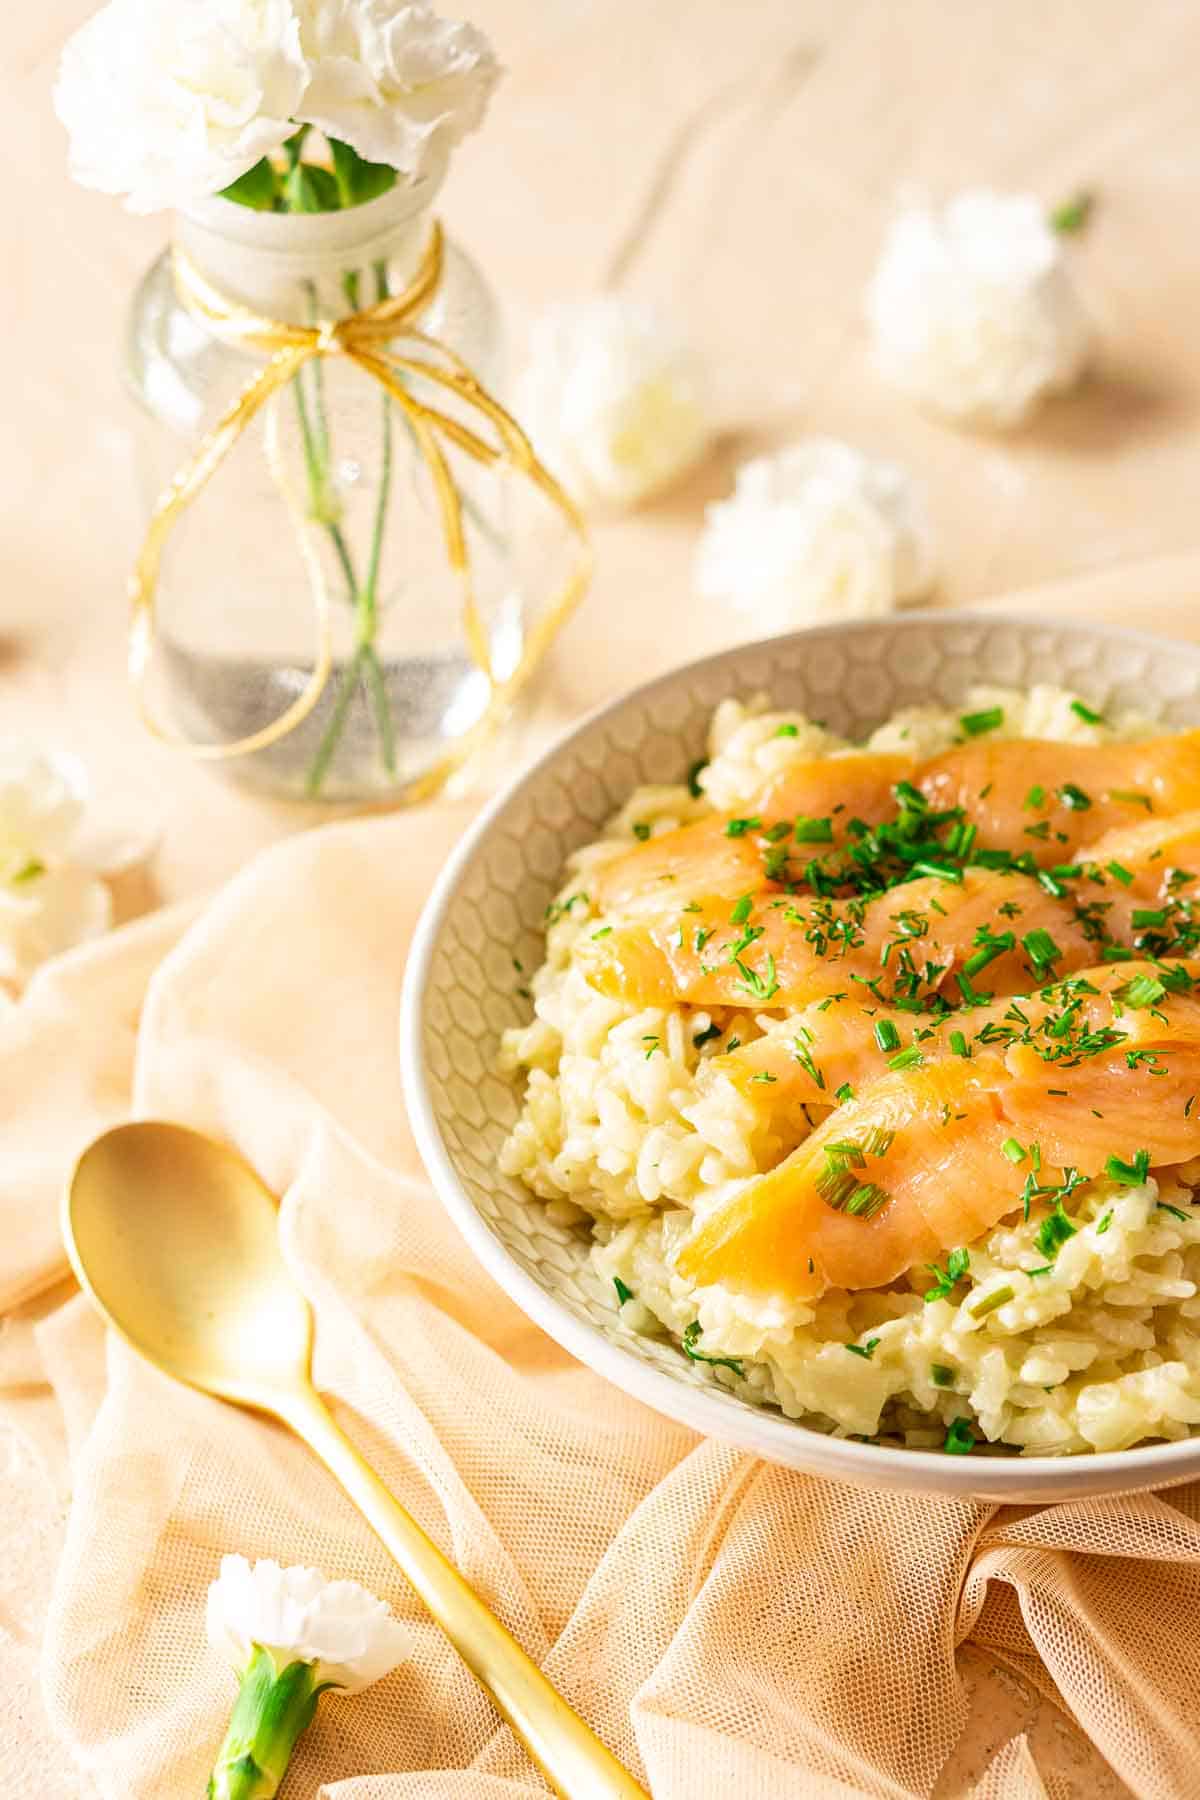 Looking down on a bowl of smoked salmon risotto with a small vase of white flowers and a gold spoon on the left.